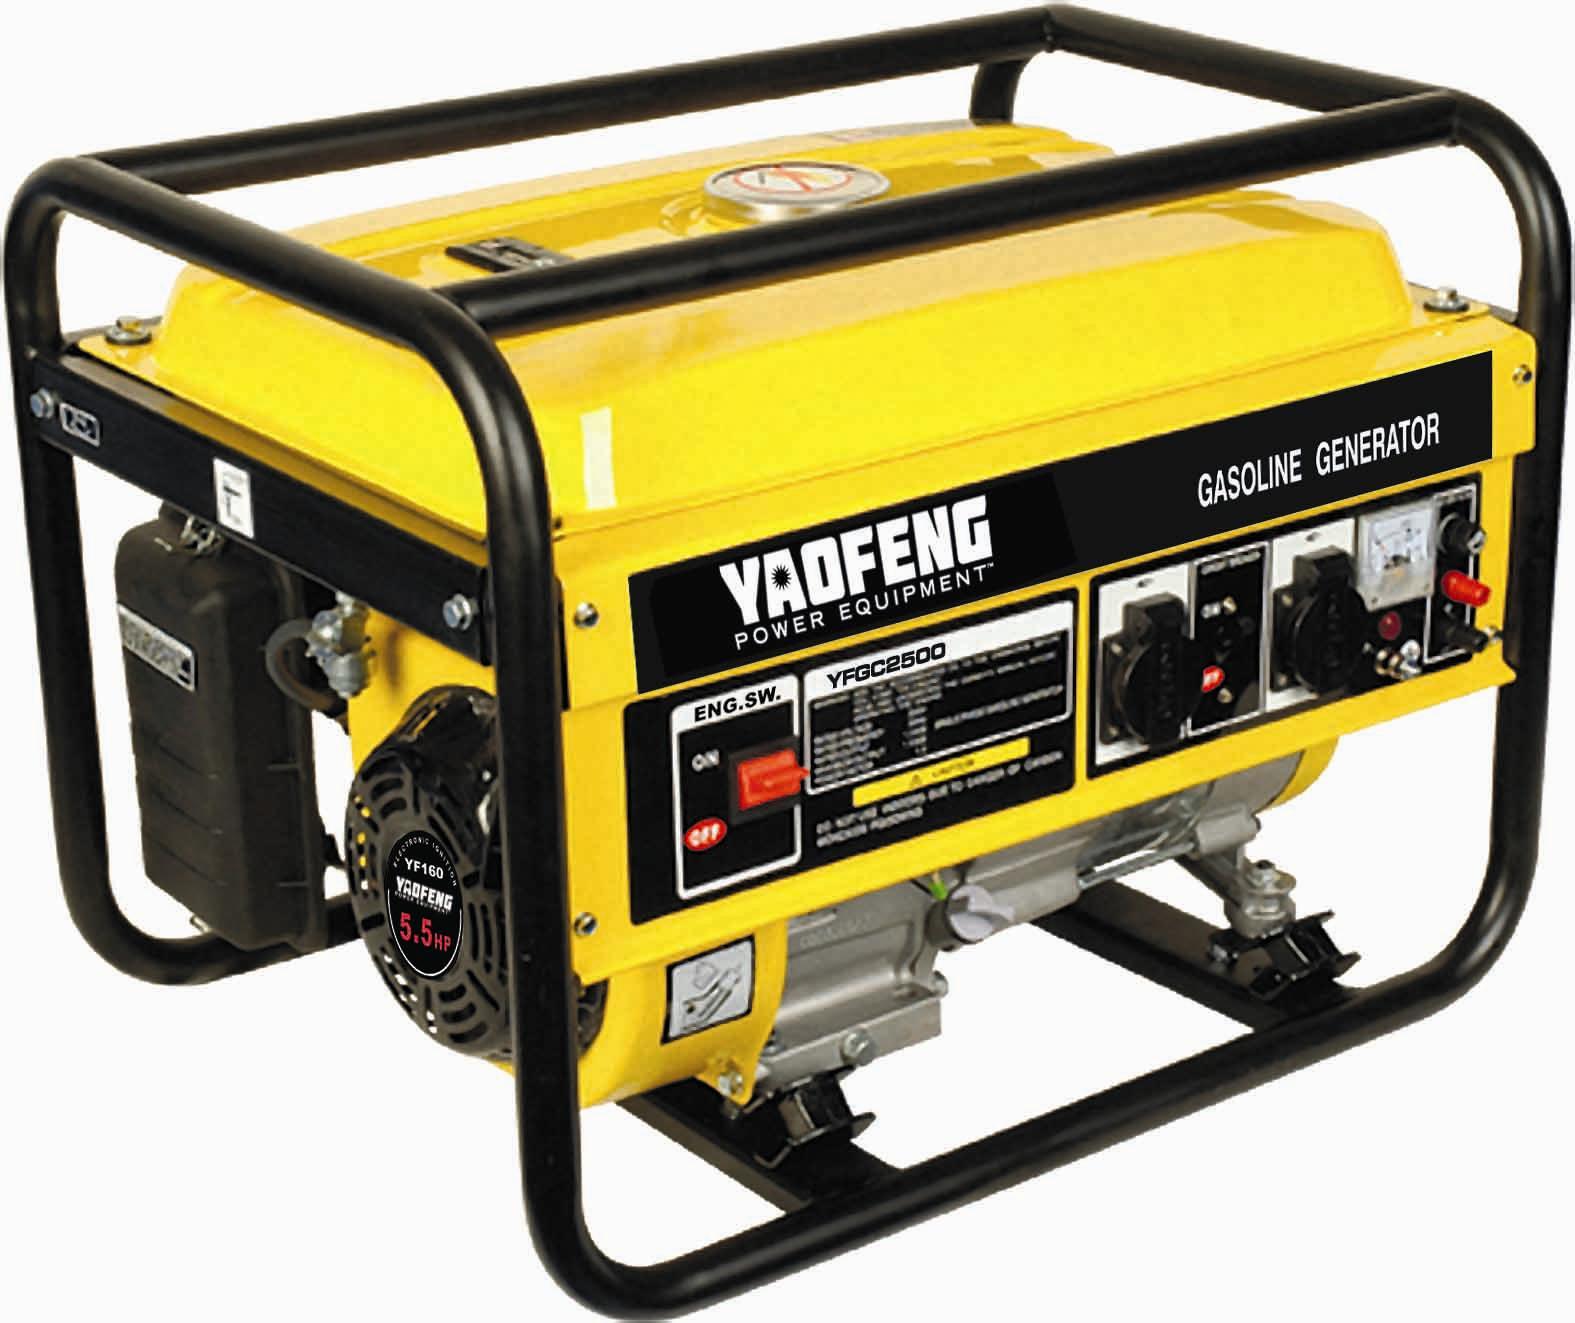 2000 Watts Portable Power Gasoline Generator with EPA, Carb, CE, Soncap Certificate (YFGC2500)